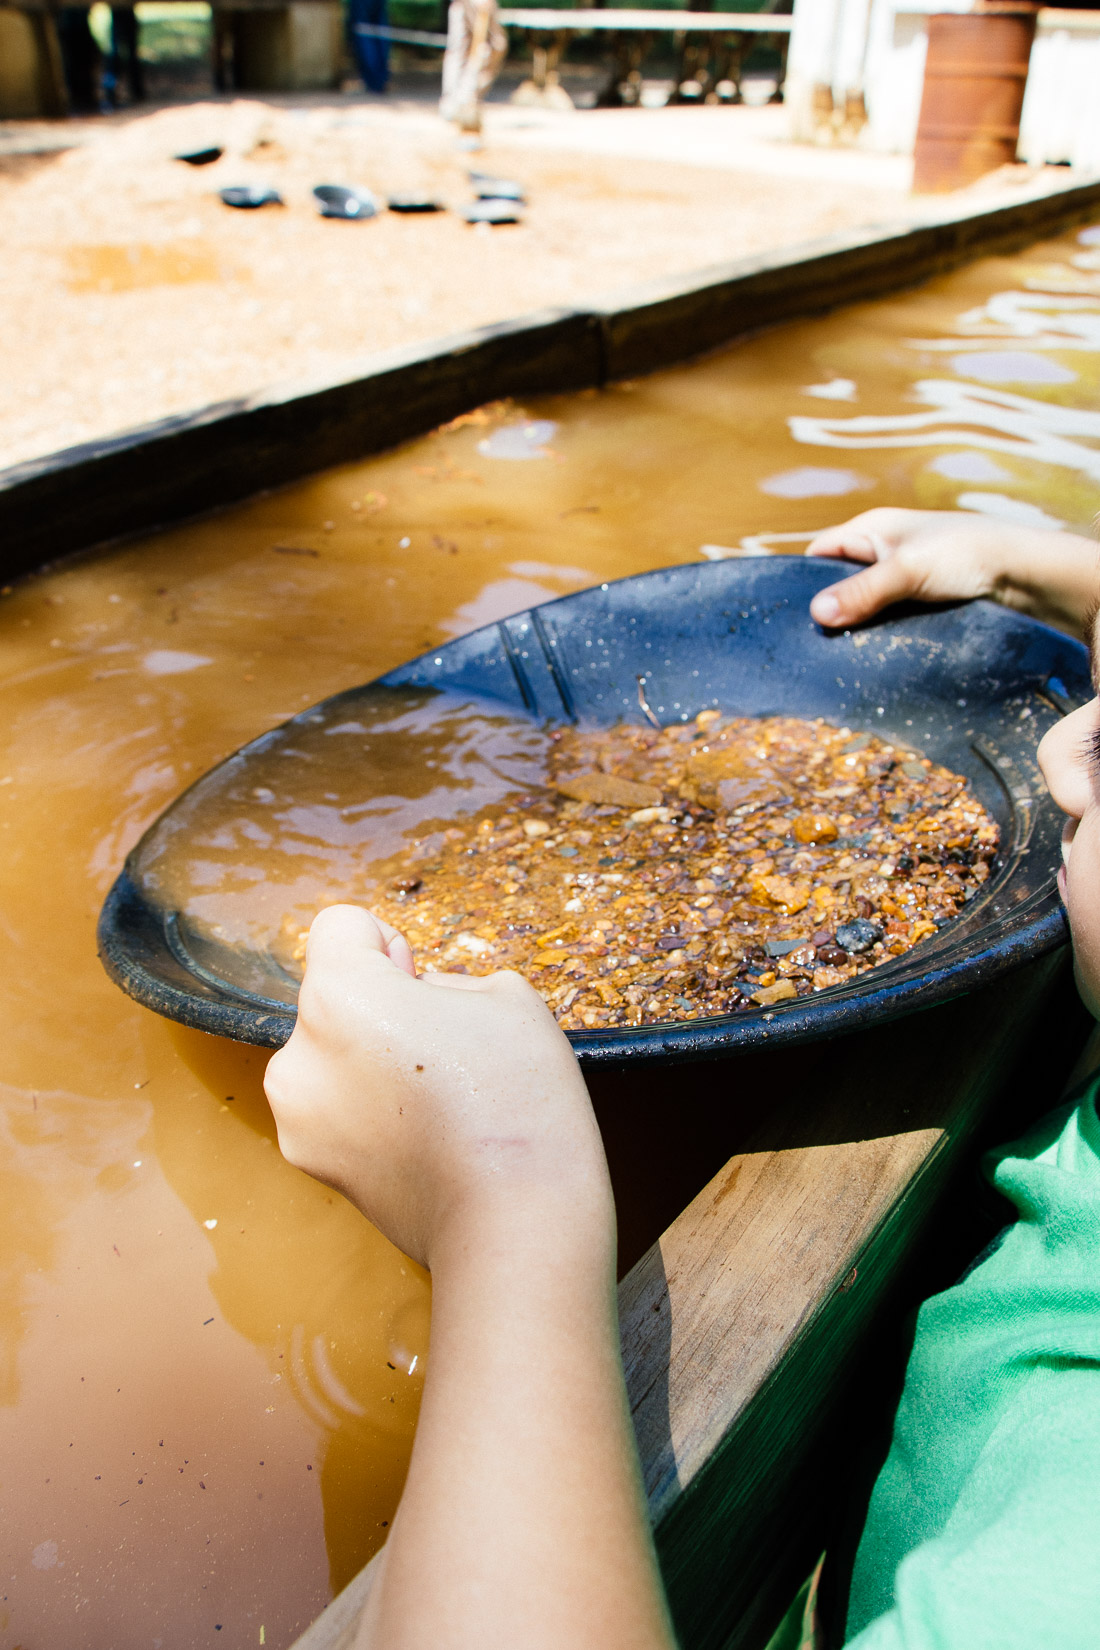 Gold Panning at Reed Gold Mine